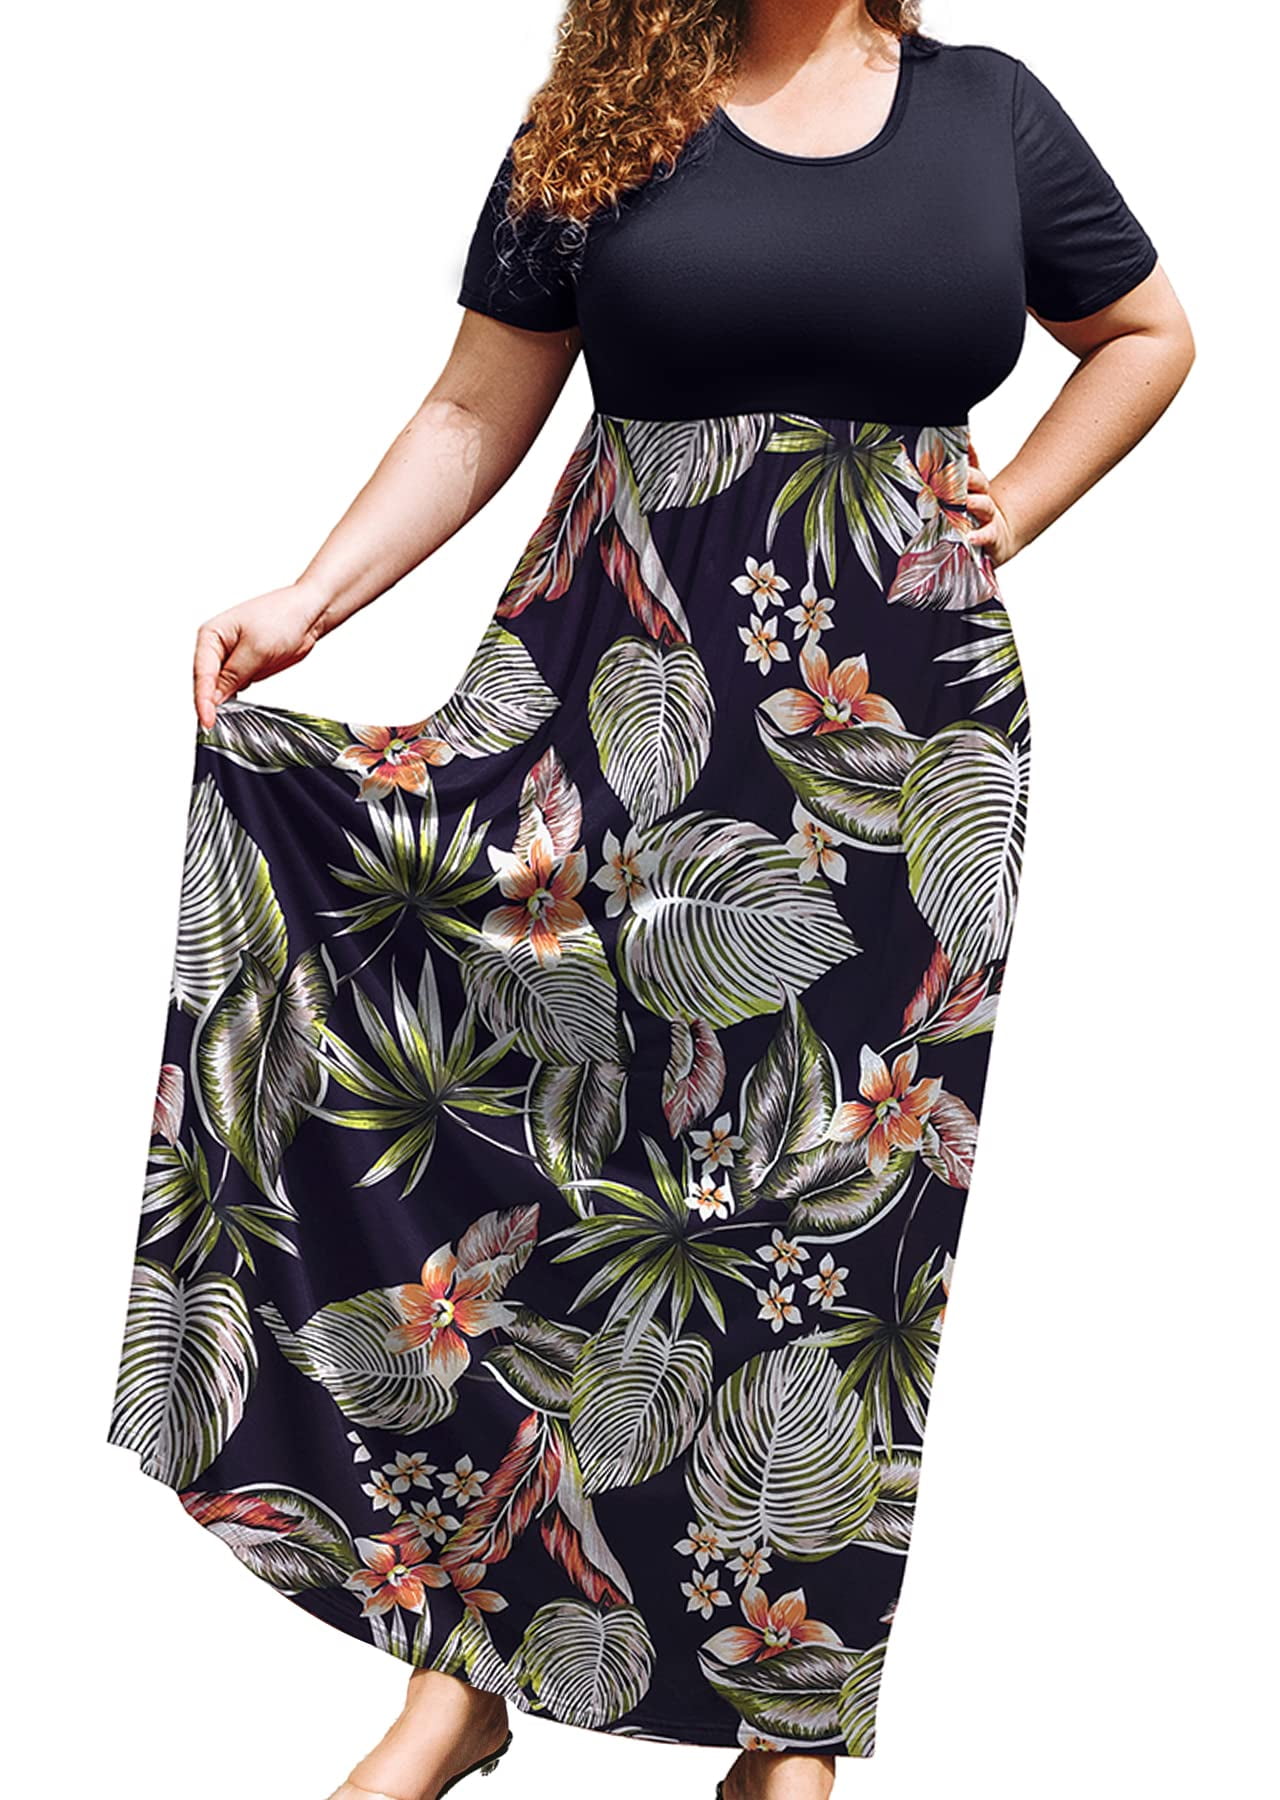 SHOWMALL Plus Size Summer Maxi Dress for Women Colorful Big Leaves 3X ...